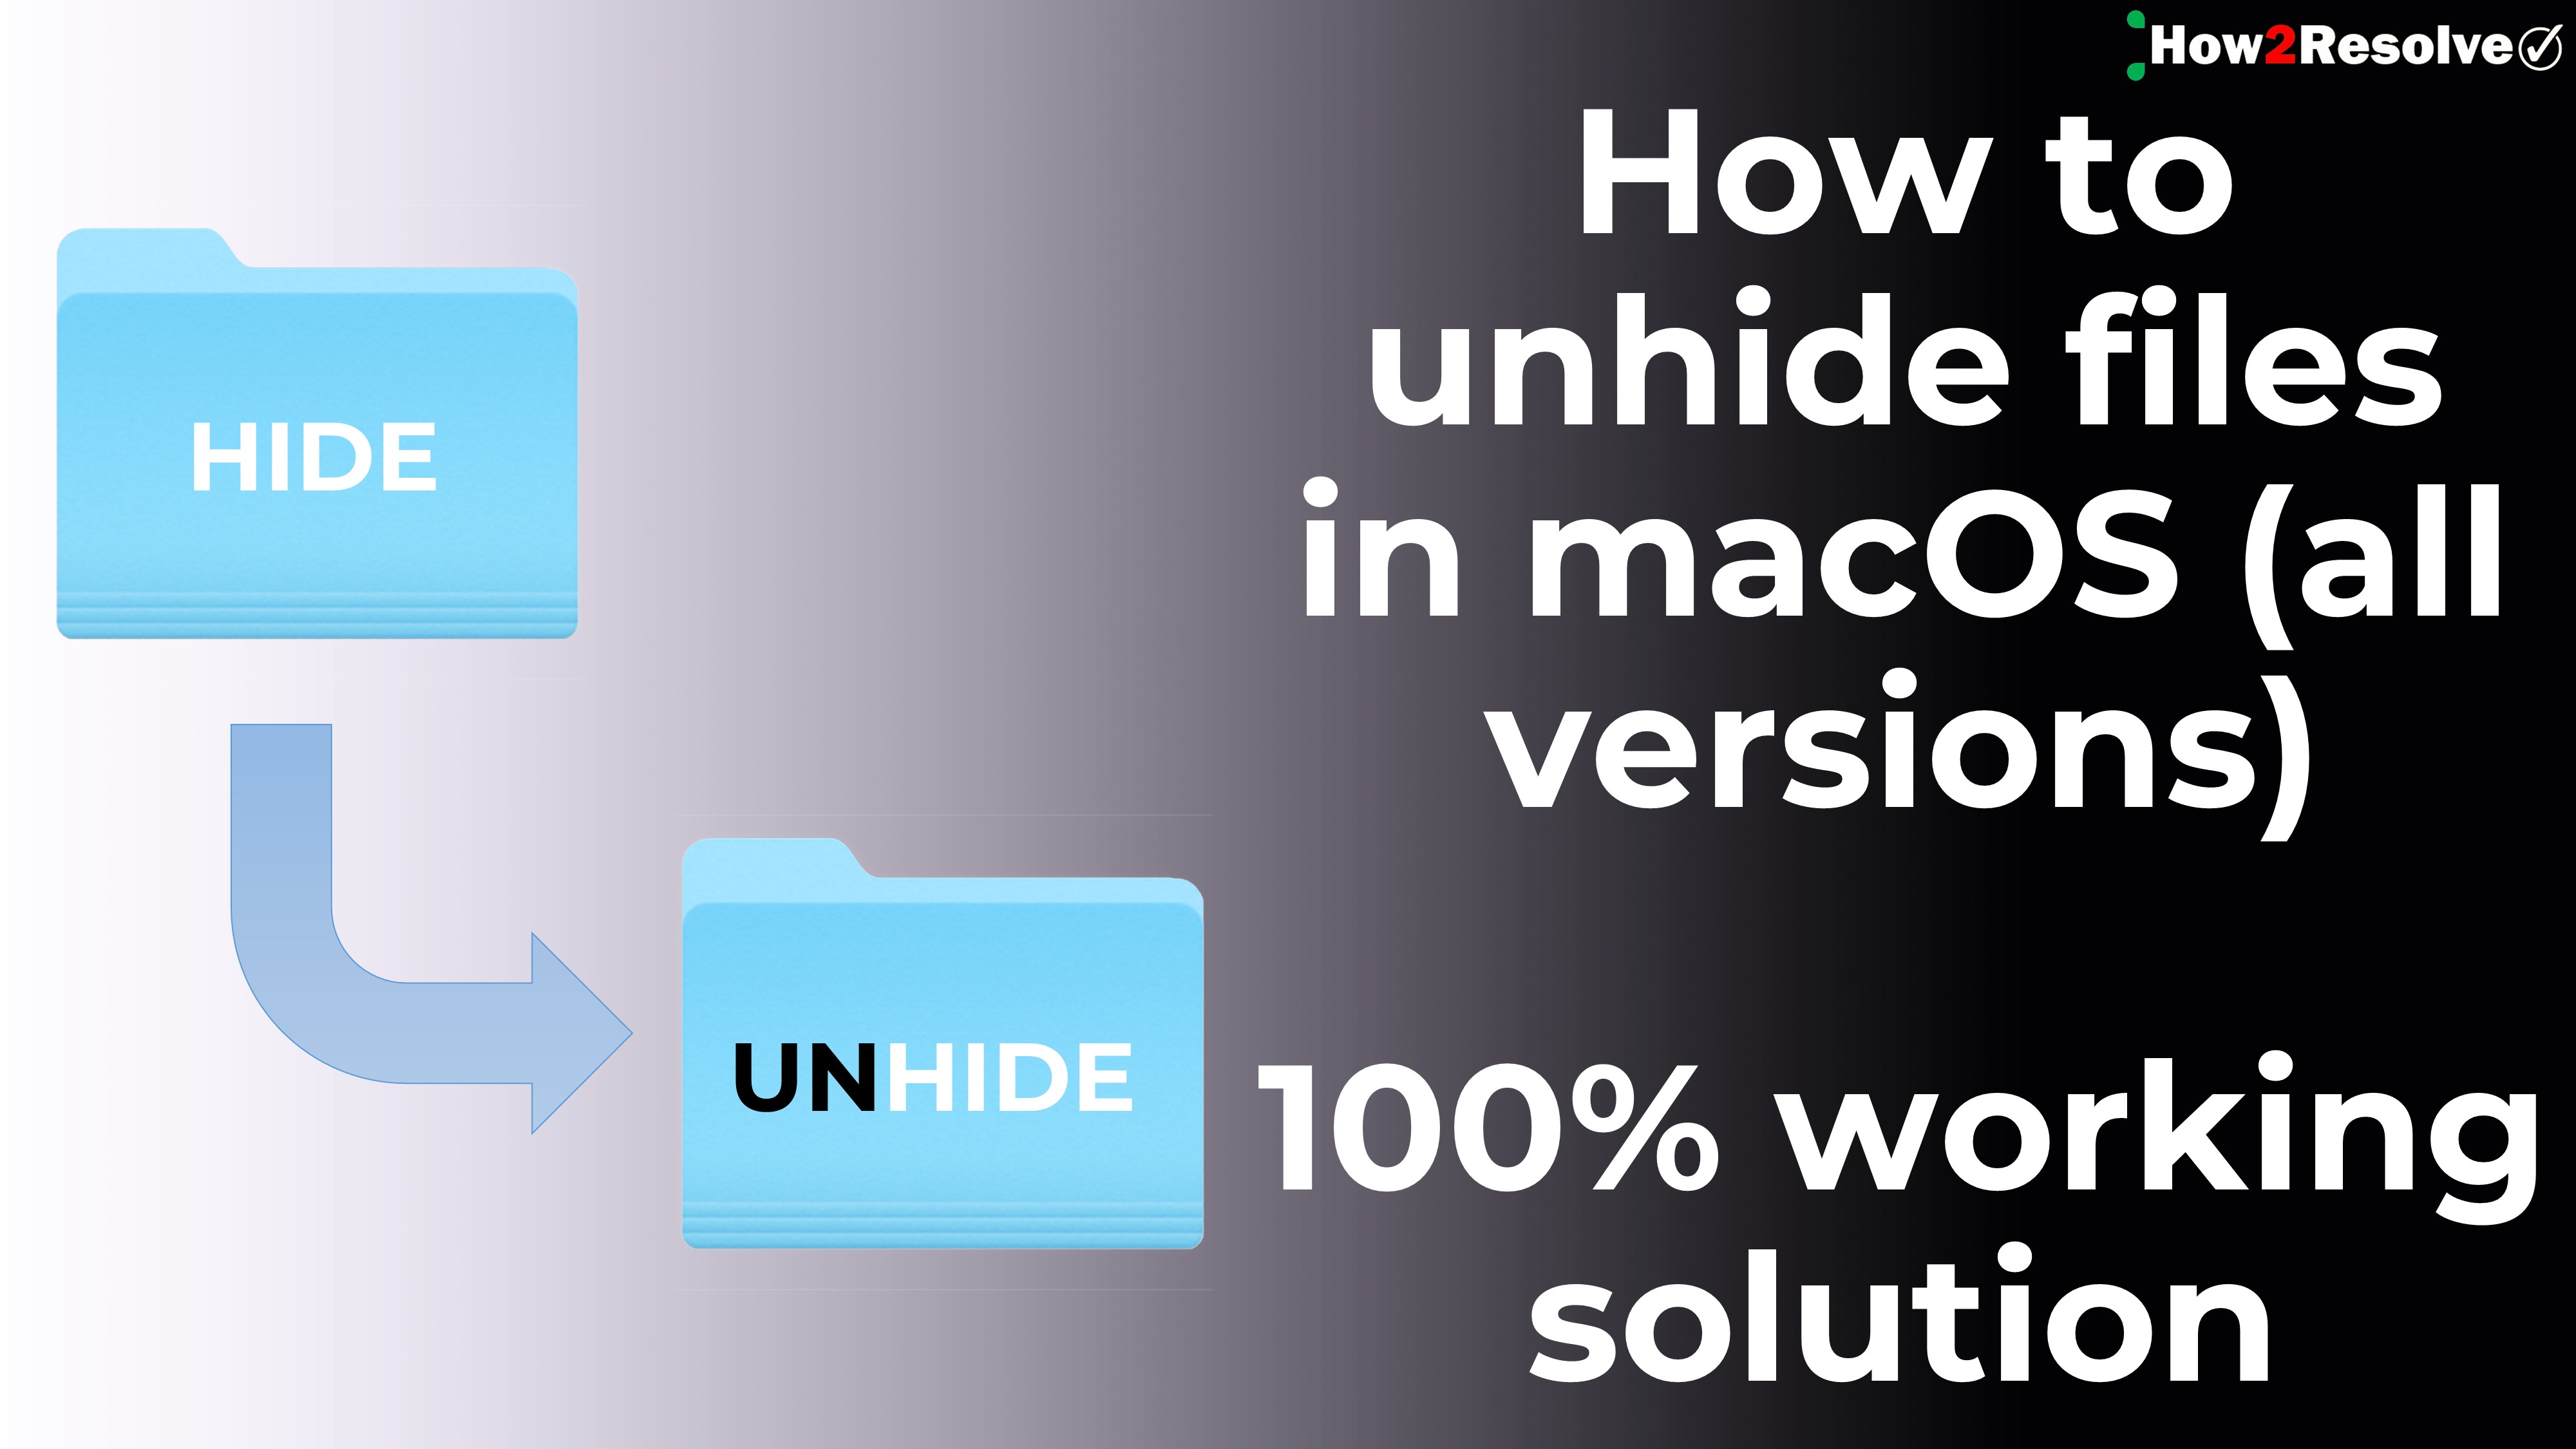 How to unhide files on MacOS (3 Methods) - Reliable and effective solutions for complete file visibility.